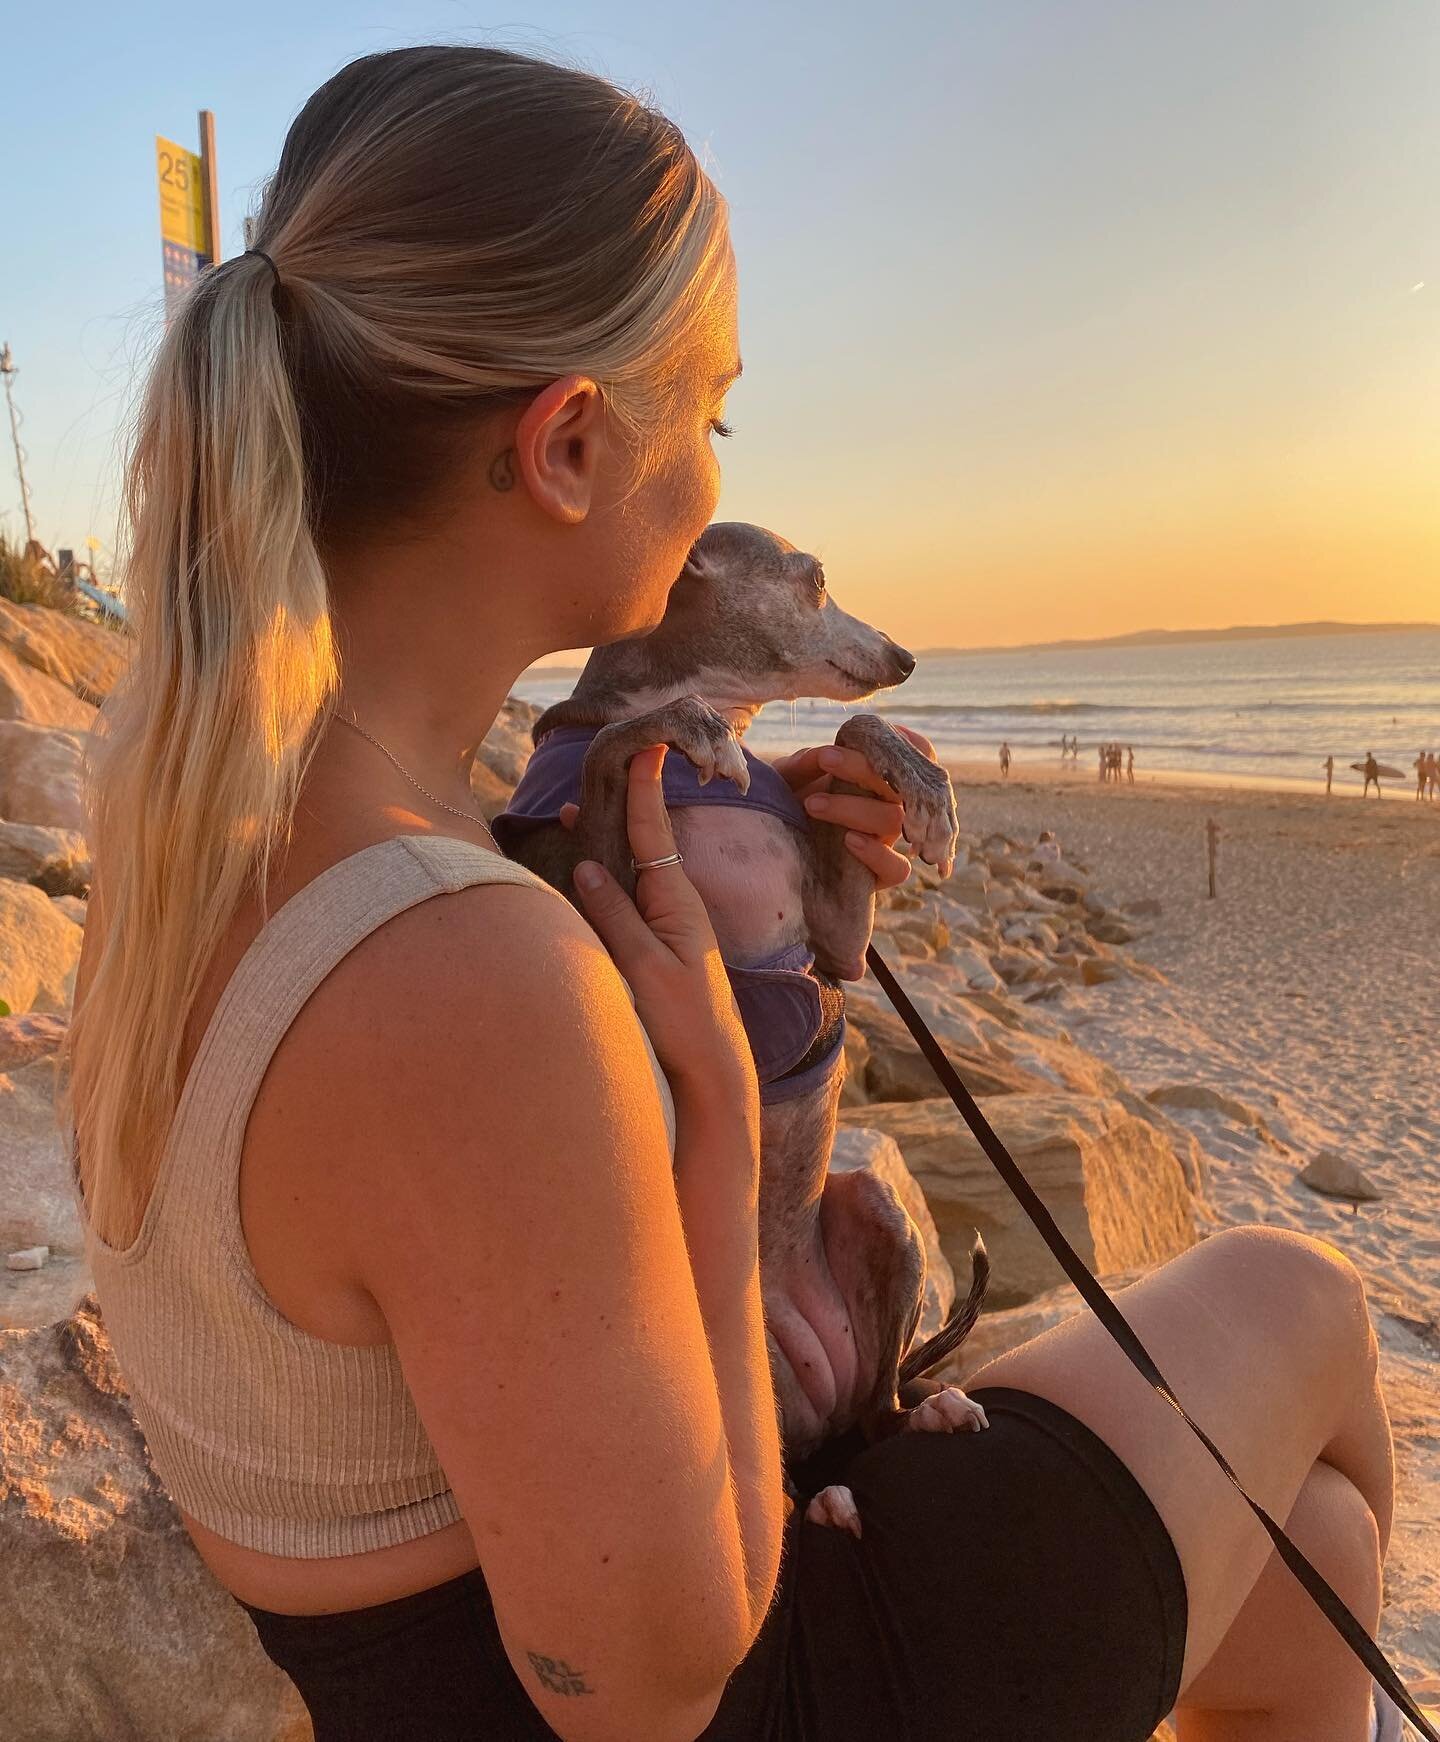 heidi &amp; aunty e 🌅 missing my babies &amp; @gengen________ 🧡💛 if you or anyone you know need a dog or cat sitter I will be available from the 19th 🫶🏽 
.
.
.
.
.
.
.
.
.

.
.
.
.
.
#italiangreyhound #ilovebeinganauntie #morningwalk  #italiangr